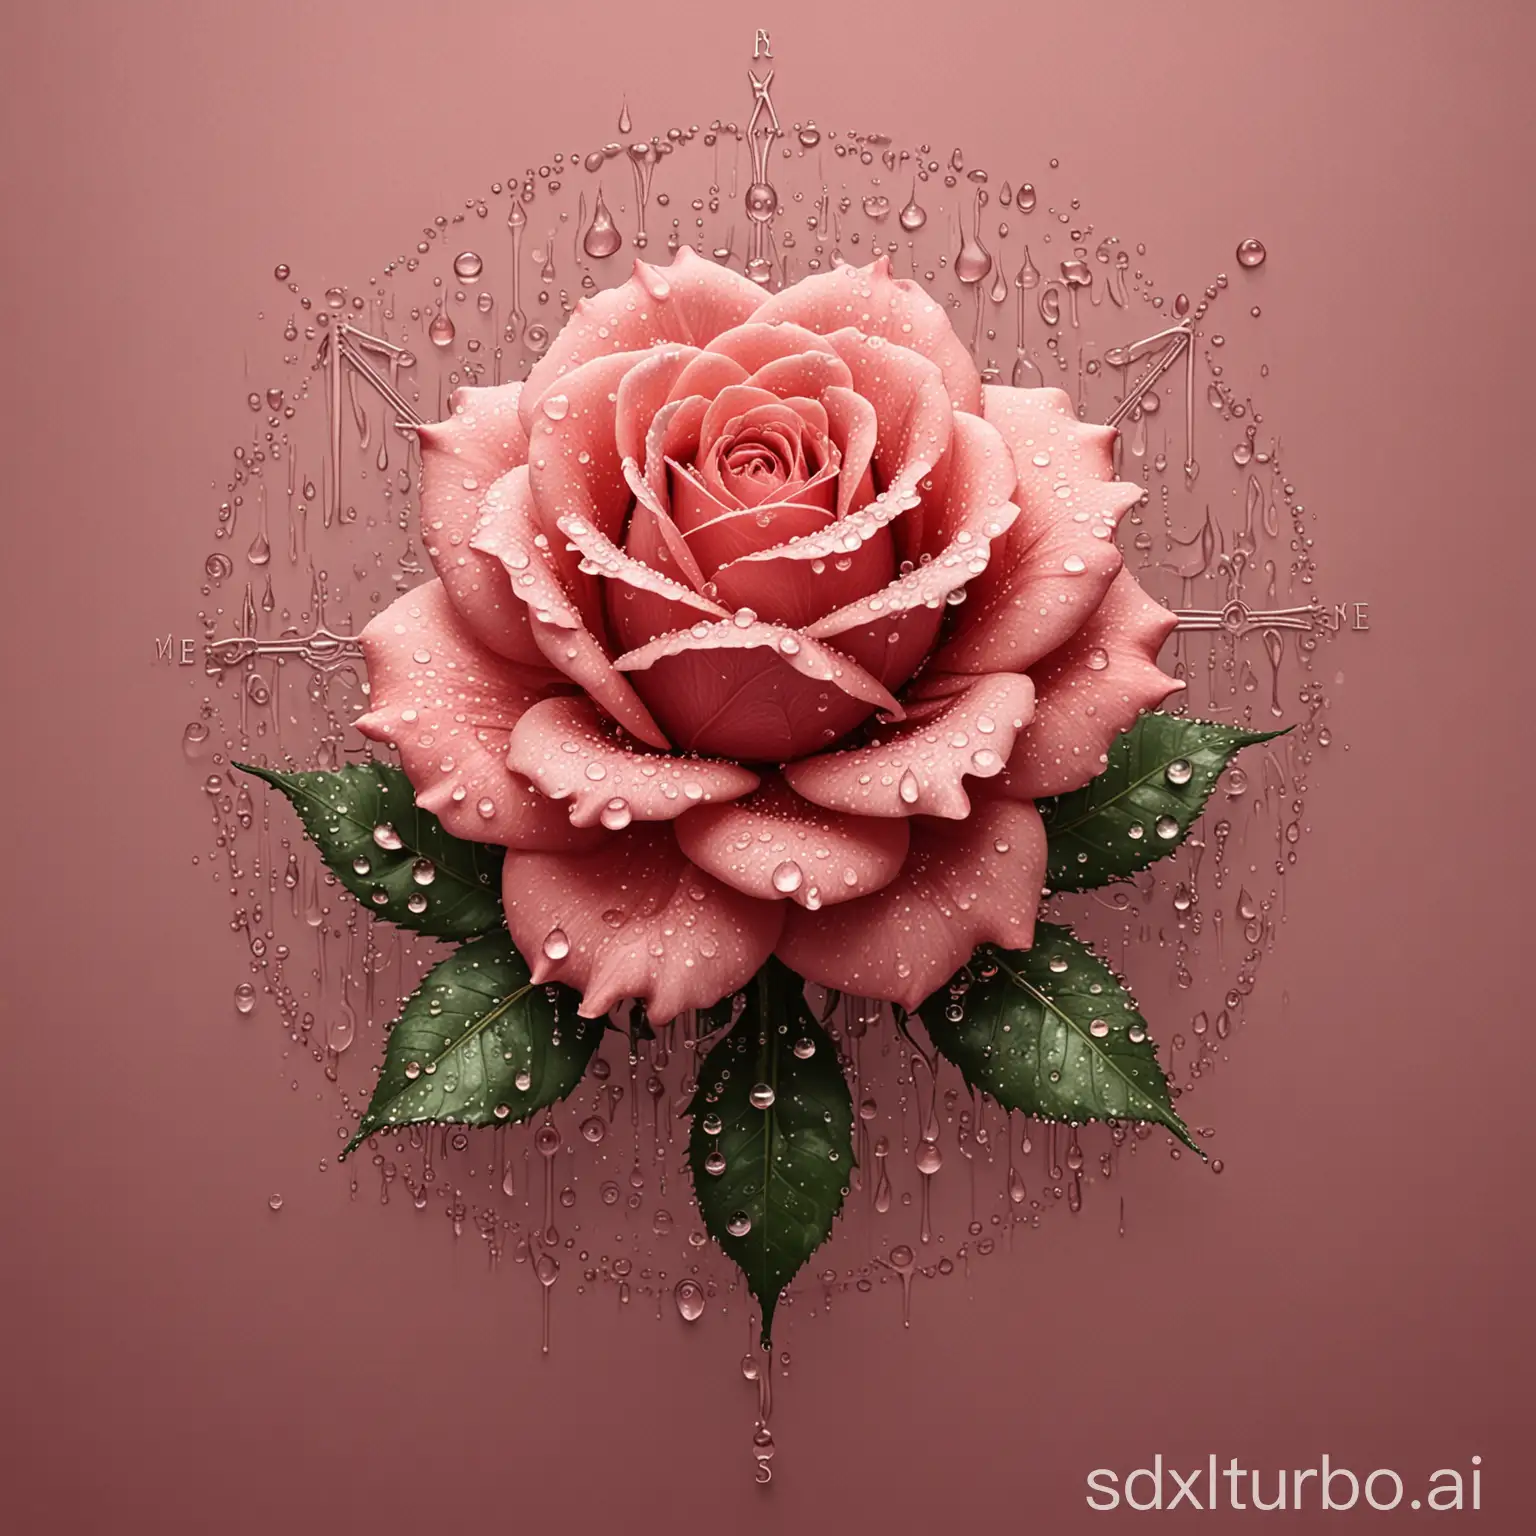 Modern-Cyber-Sigil-Rose-with-Dewdrops-and-Symbolic-Elements